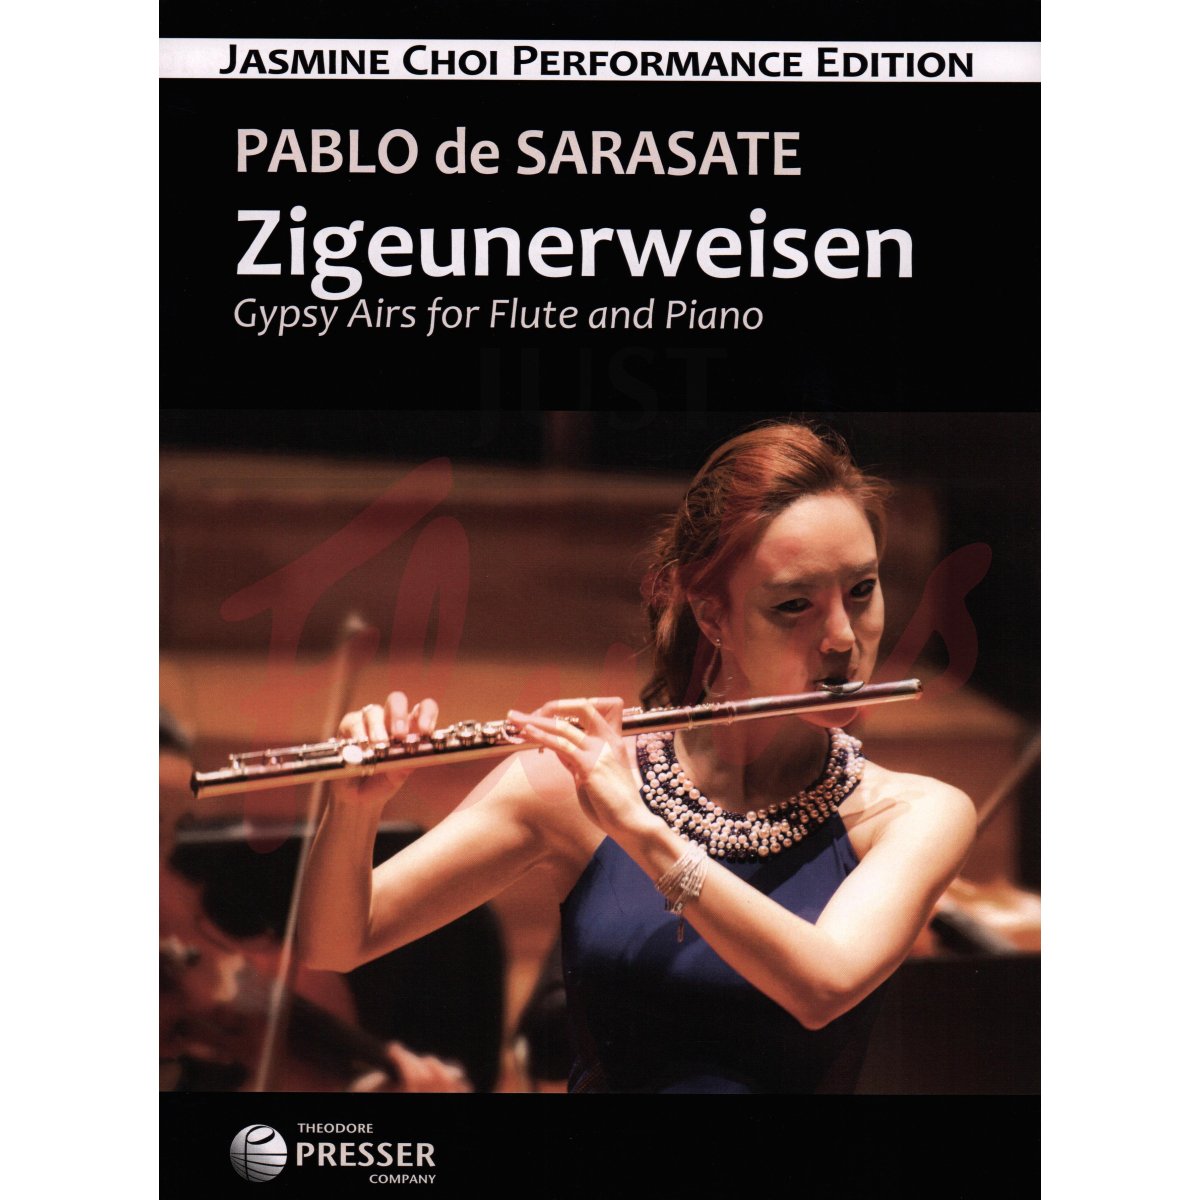 Zigeunerweisen: Gypsy Airs for Flute and Piano